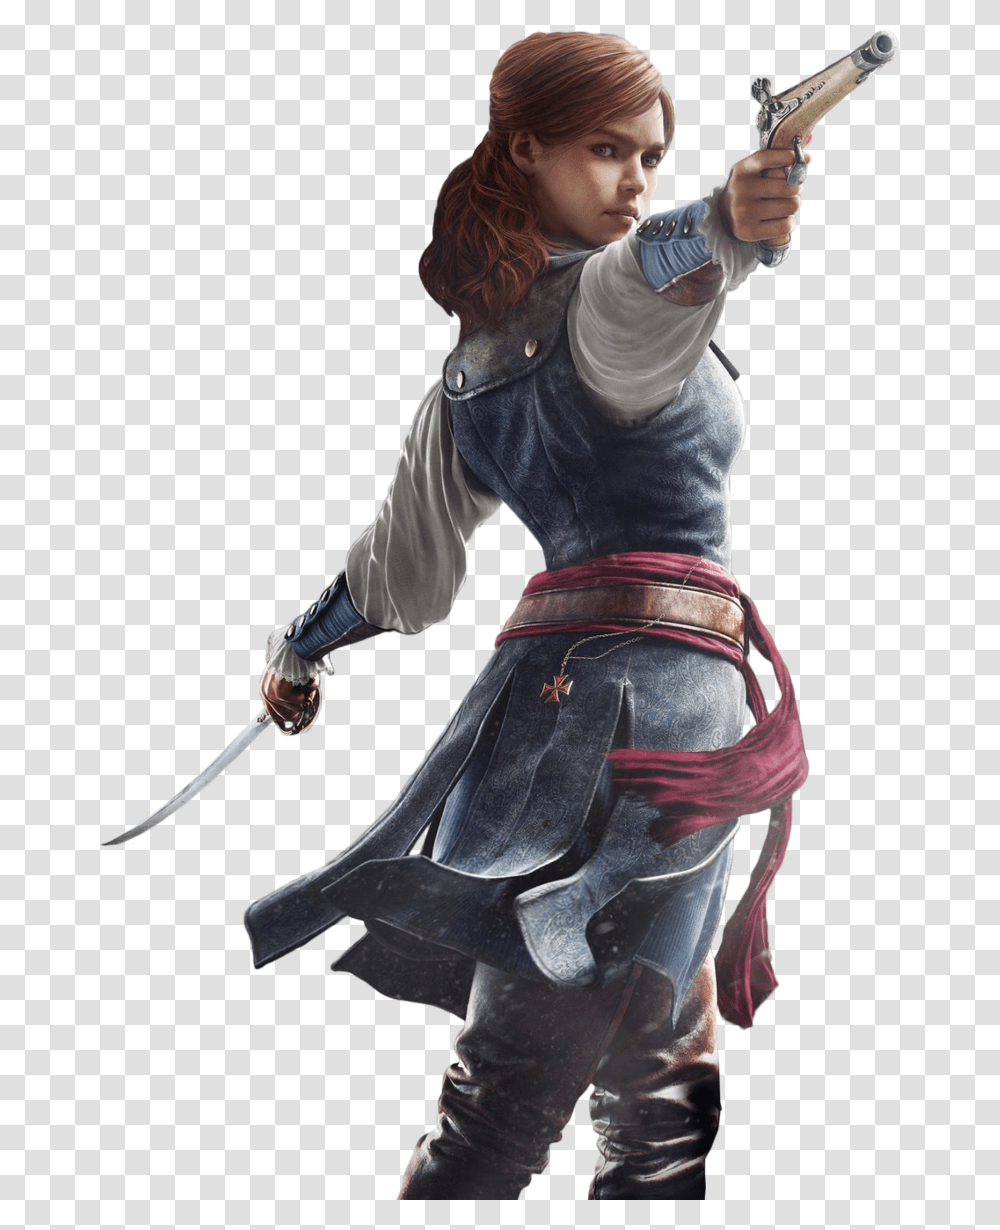 Download Assassins Creed Unity Photos Assassin's Creed Unity, Person, Human, Figurine, Ninja Transparent Png